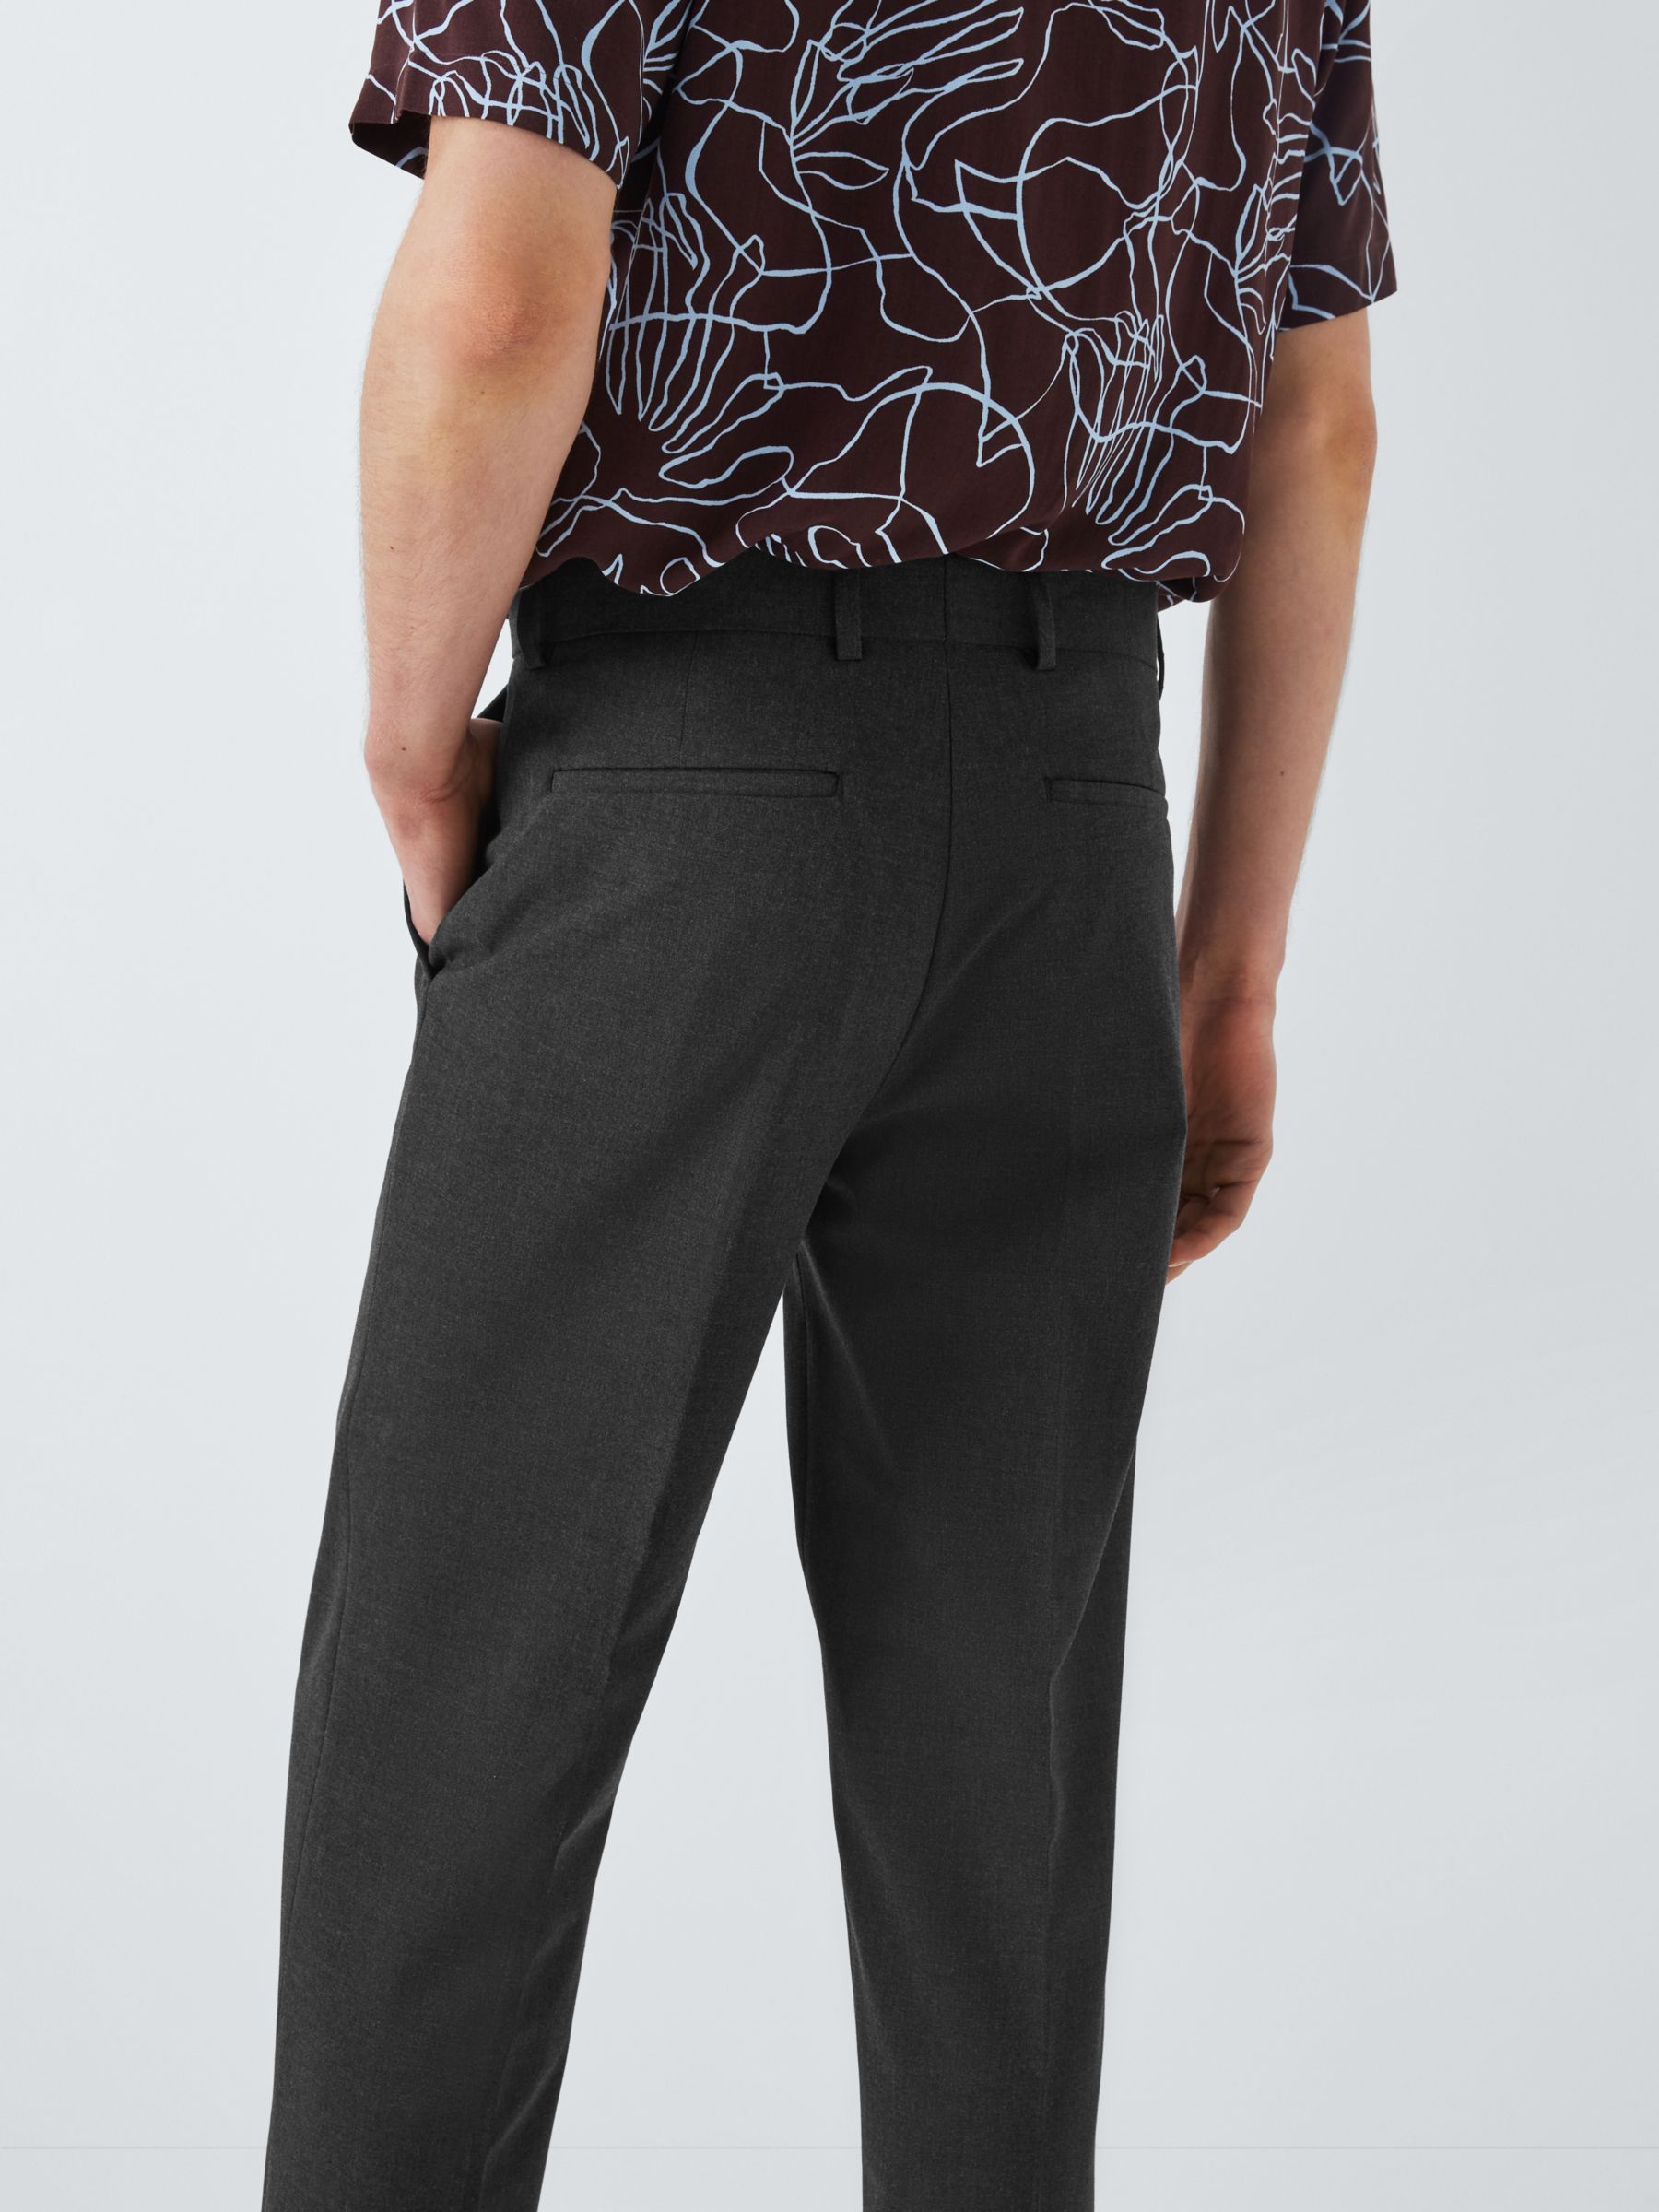 Kin Smart Pleat Straight Fit Trousers, Charcoal at John Lewis & Partners